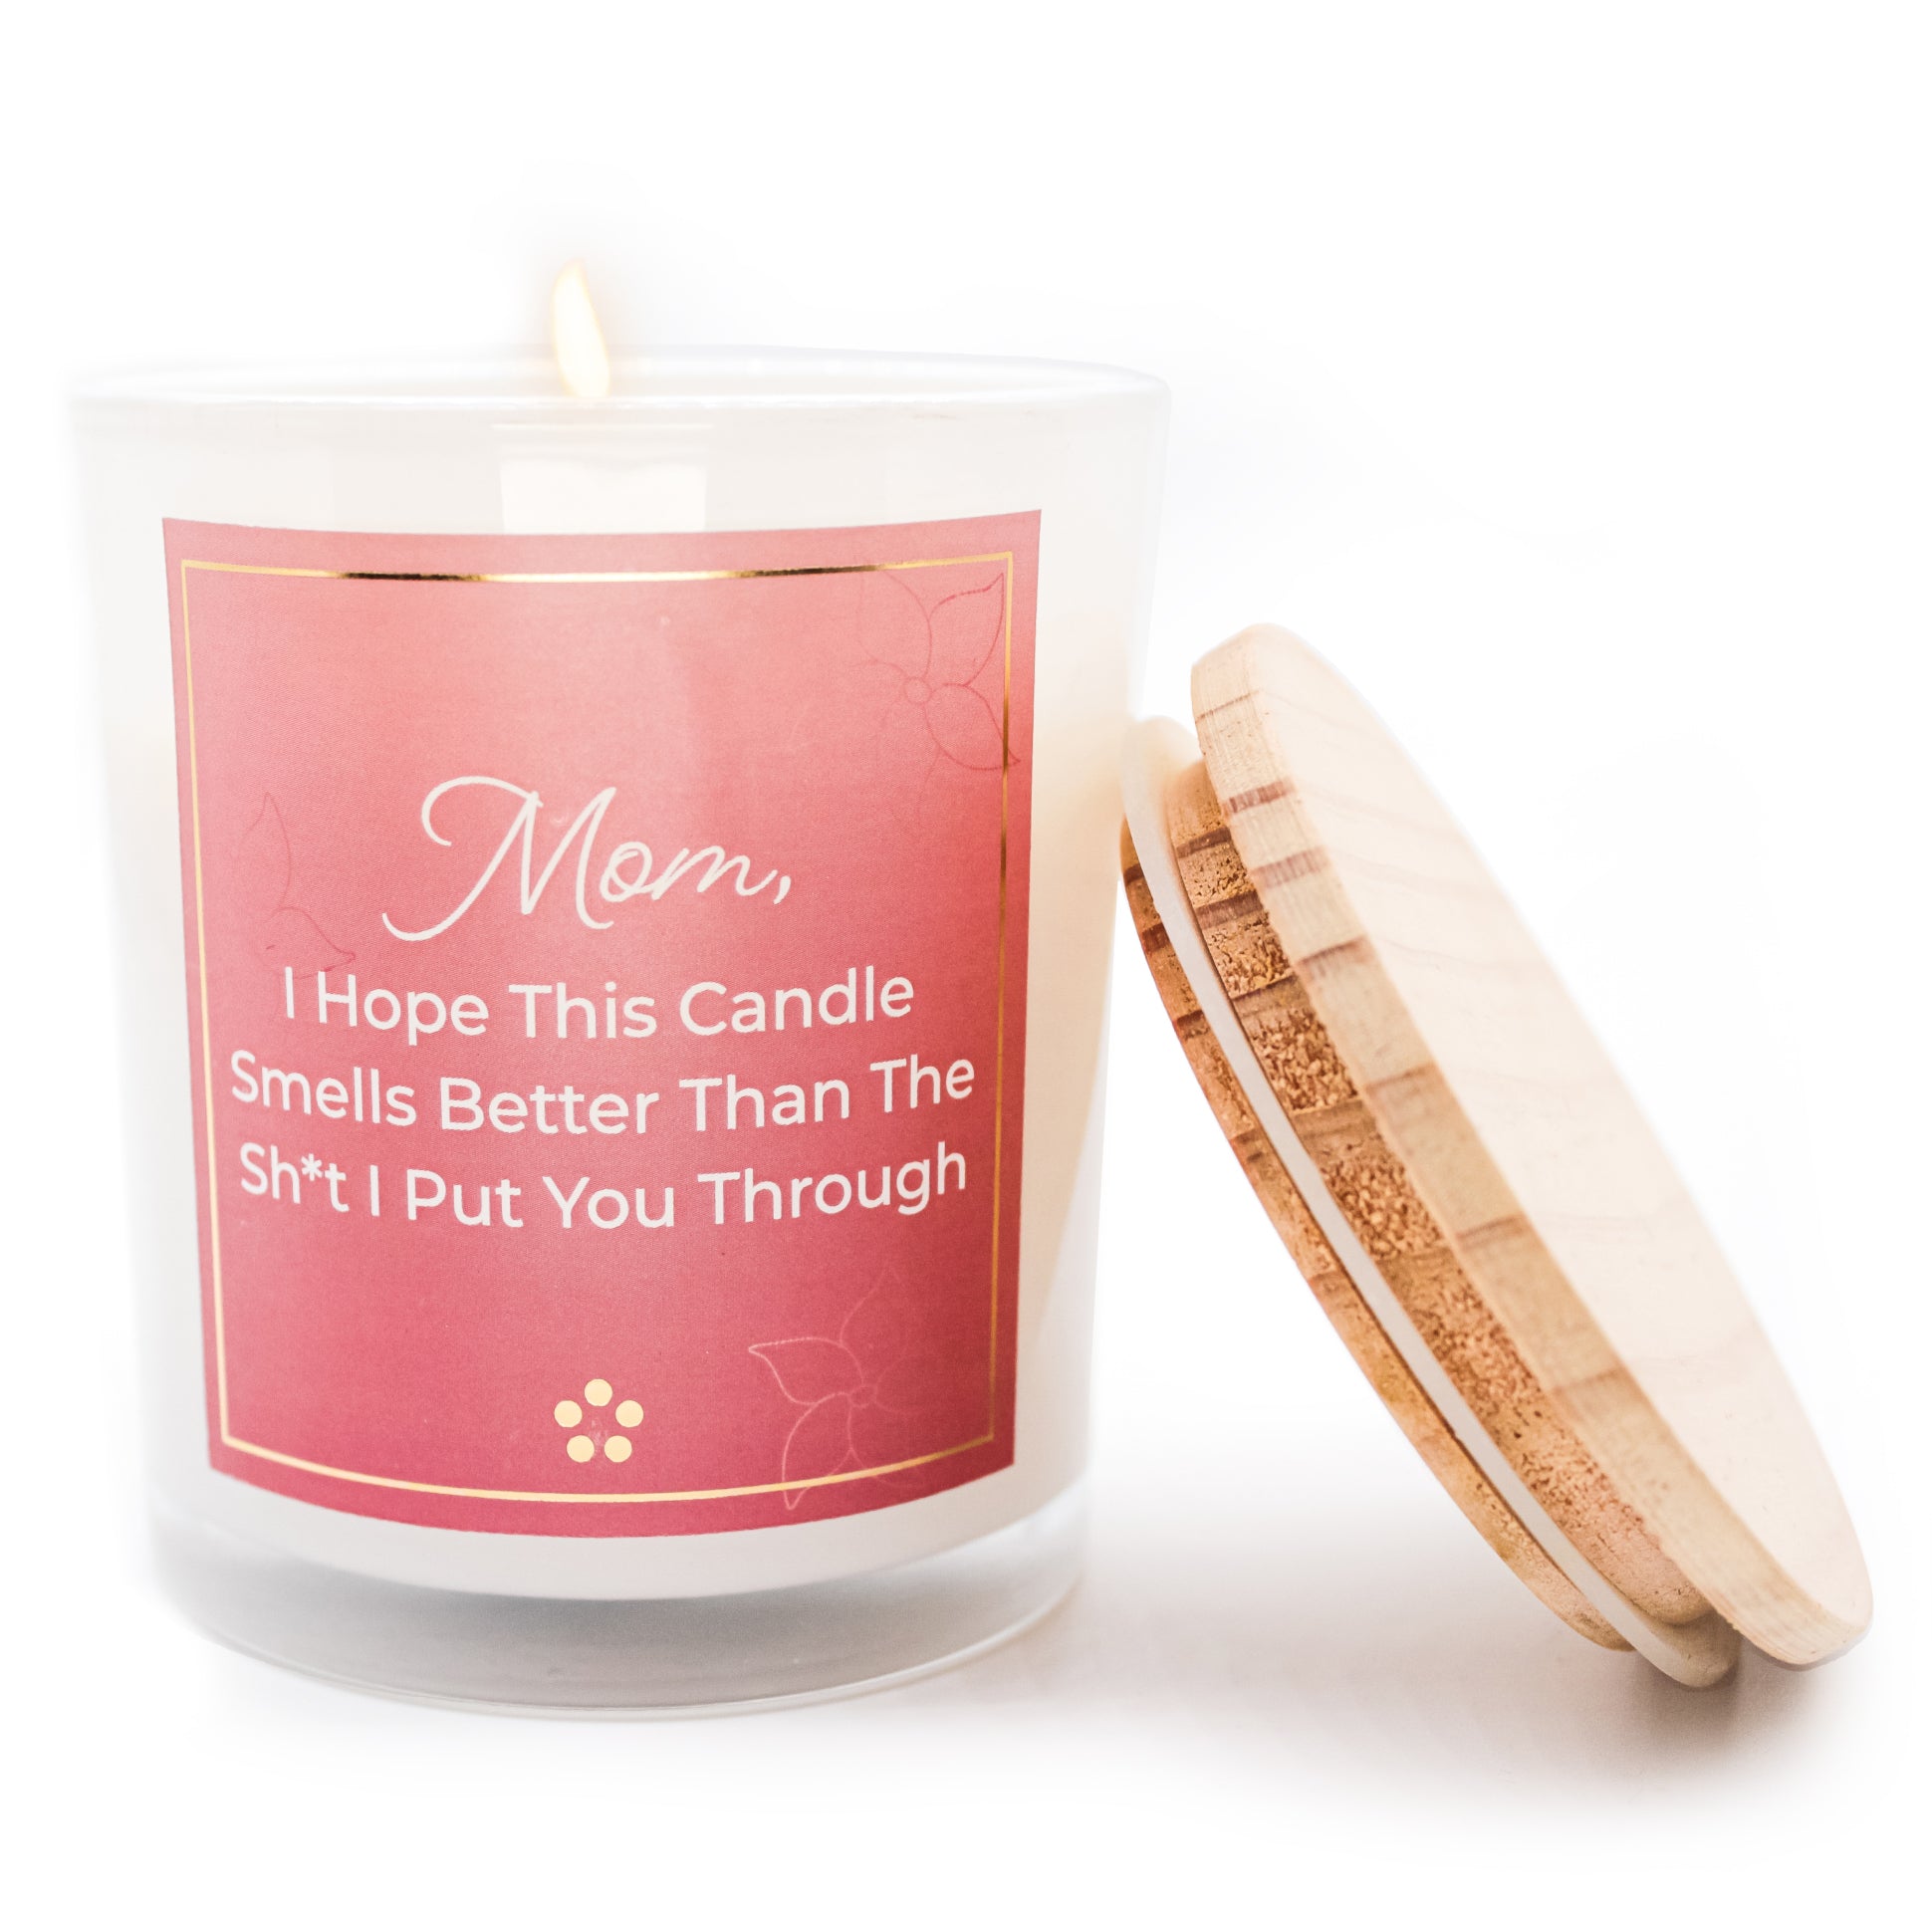 Funny Mom Candle – JadesTropicalCreations